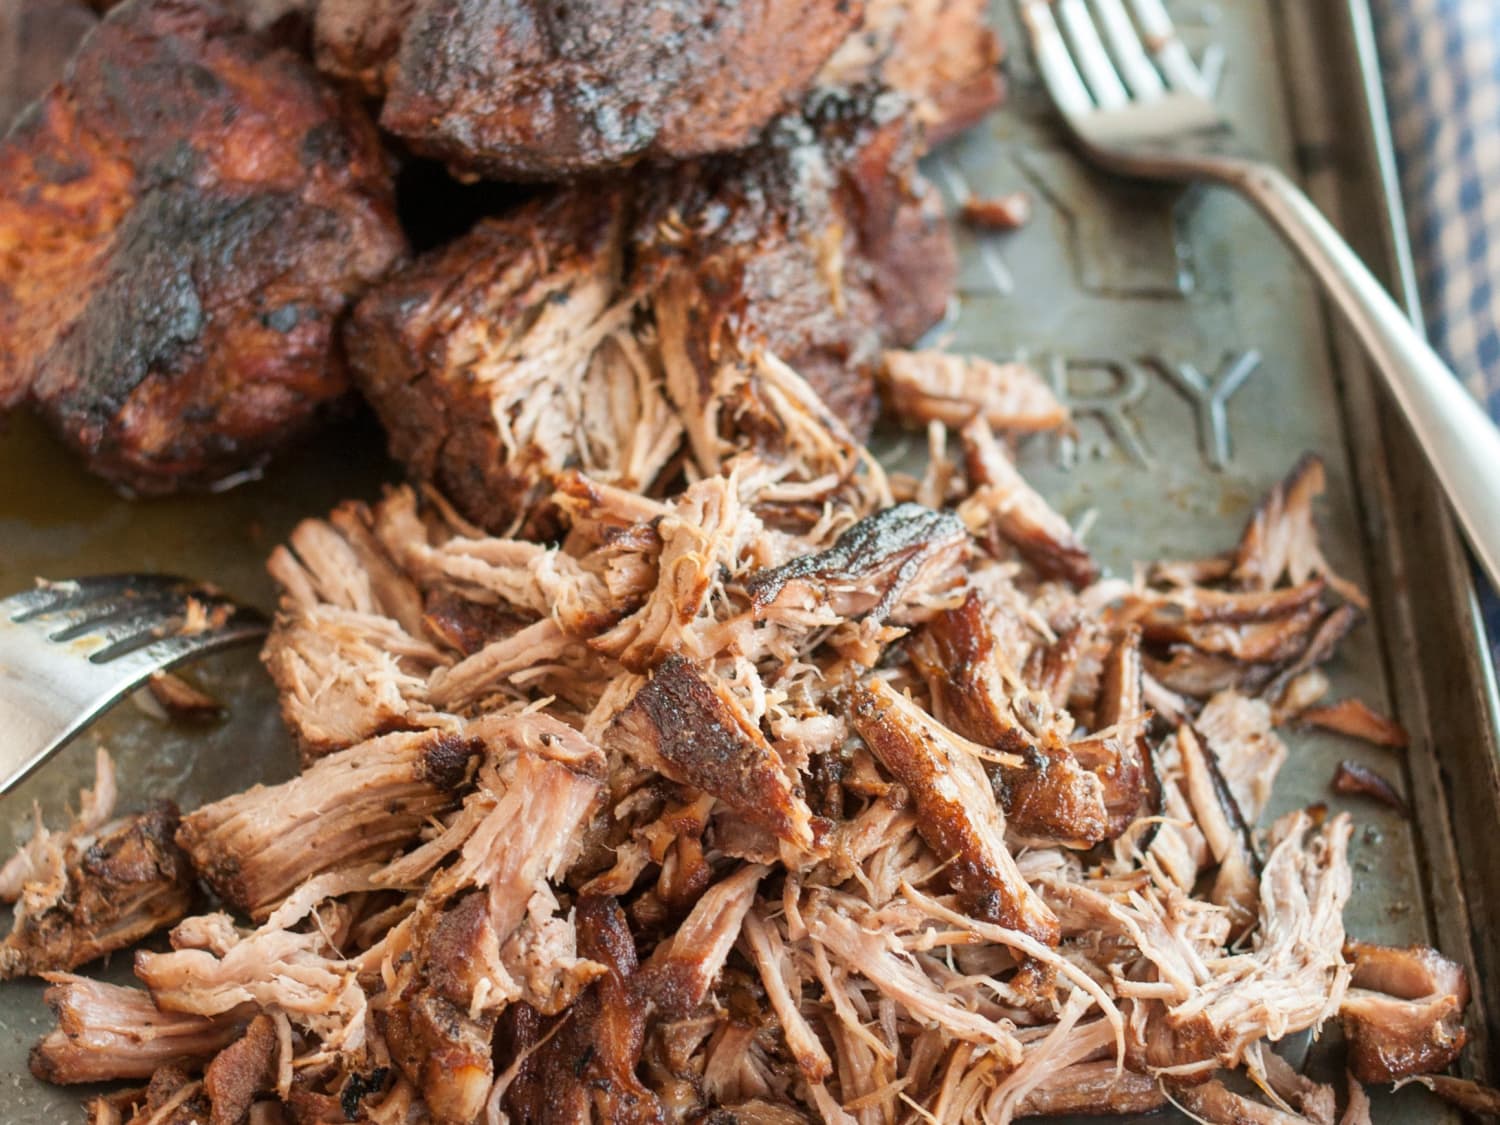 How to Make the Best Pulled Pork (Smoker, Slow Cooker or Oven)